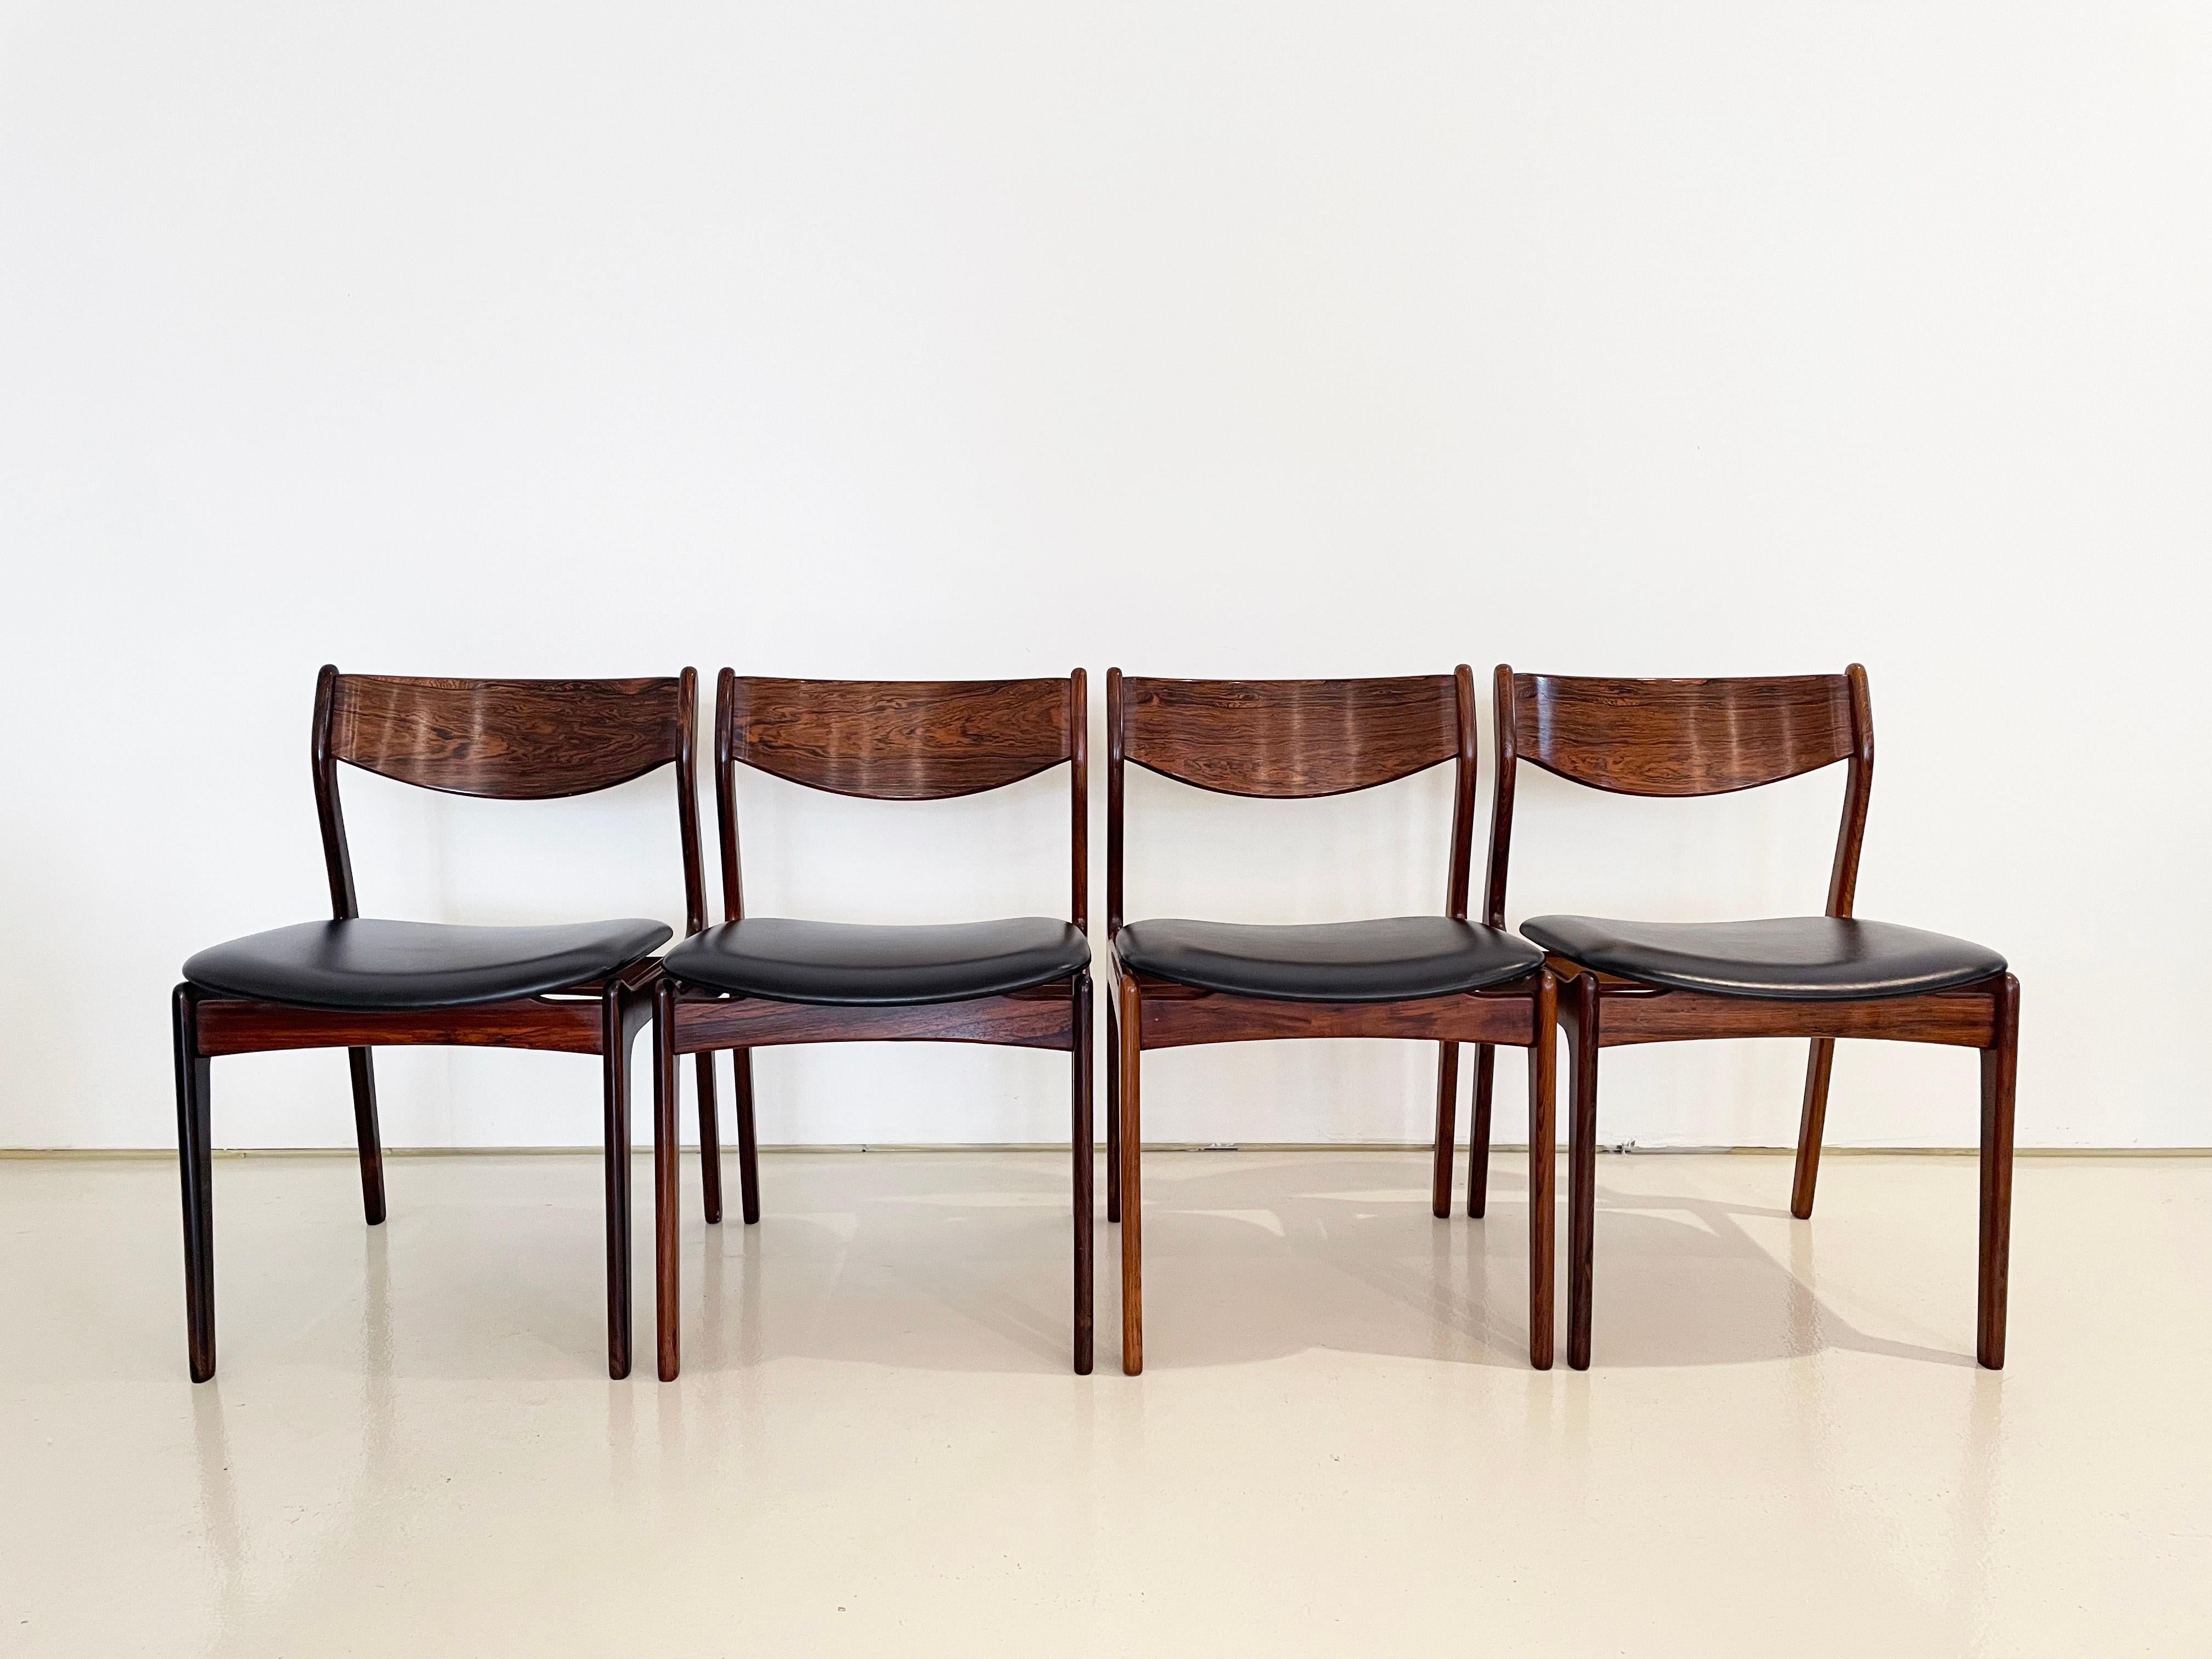 Vintage Mid-century Danish Dining Chairs, Designed by P.E. Jorgensen, Set of 8 For Sale 2